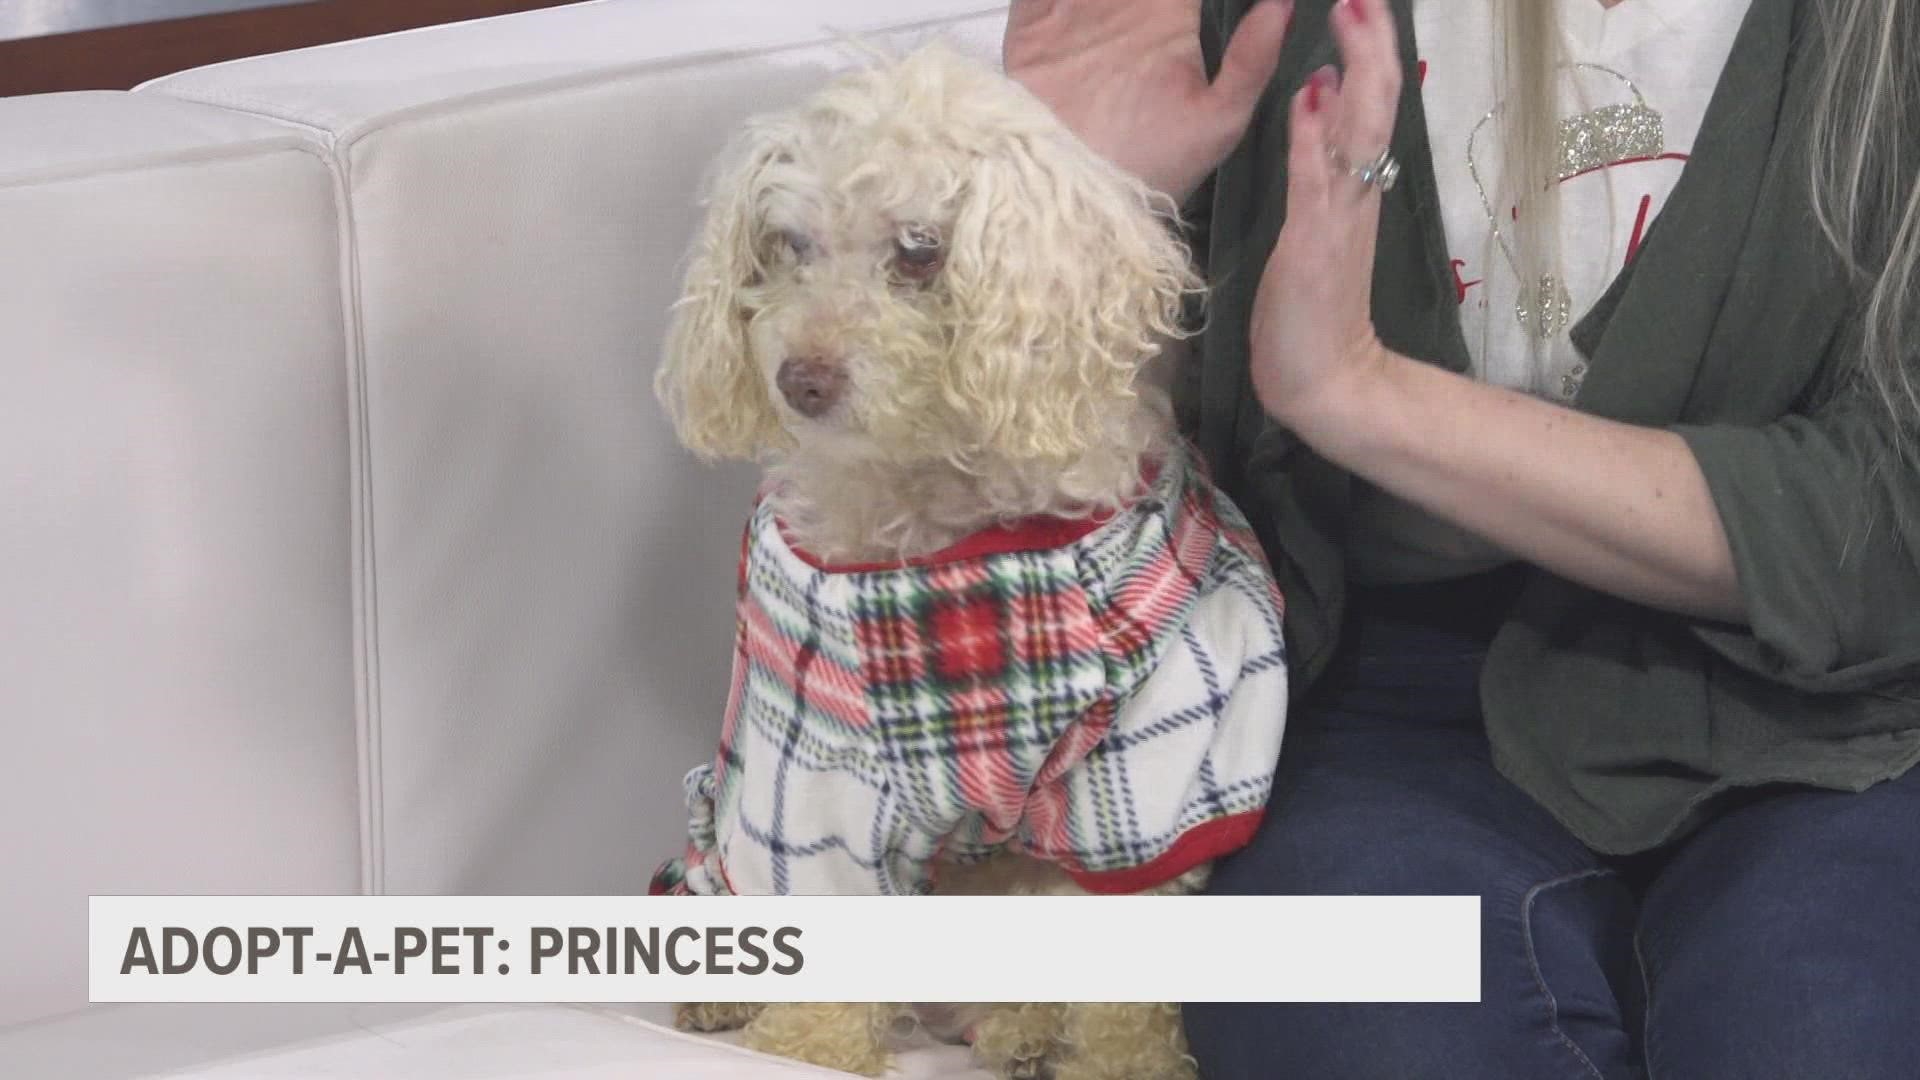 Princess, 15, is available for adoption from the Muskegon Humane Society.